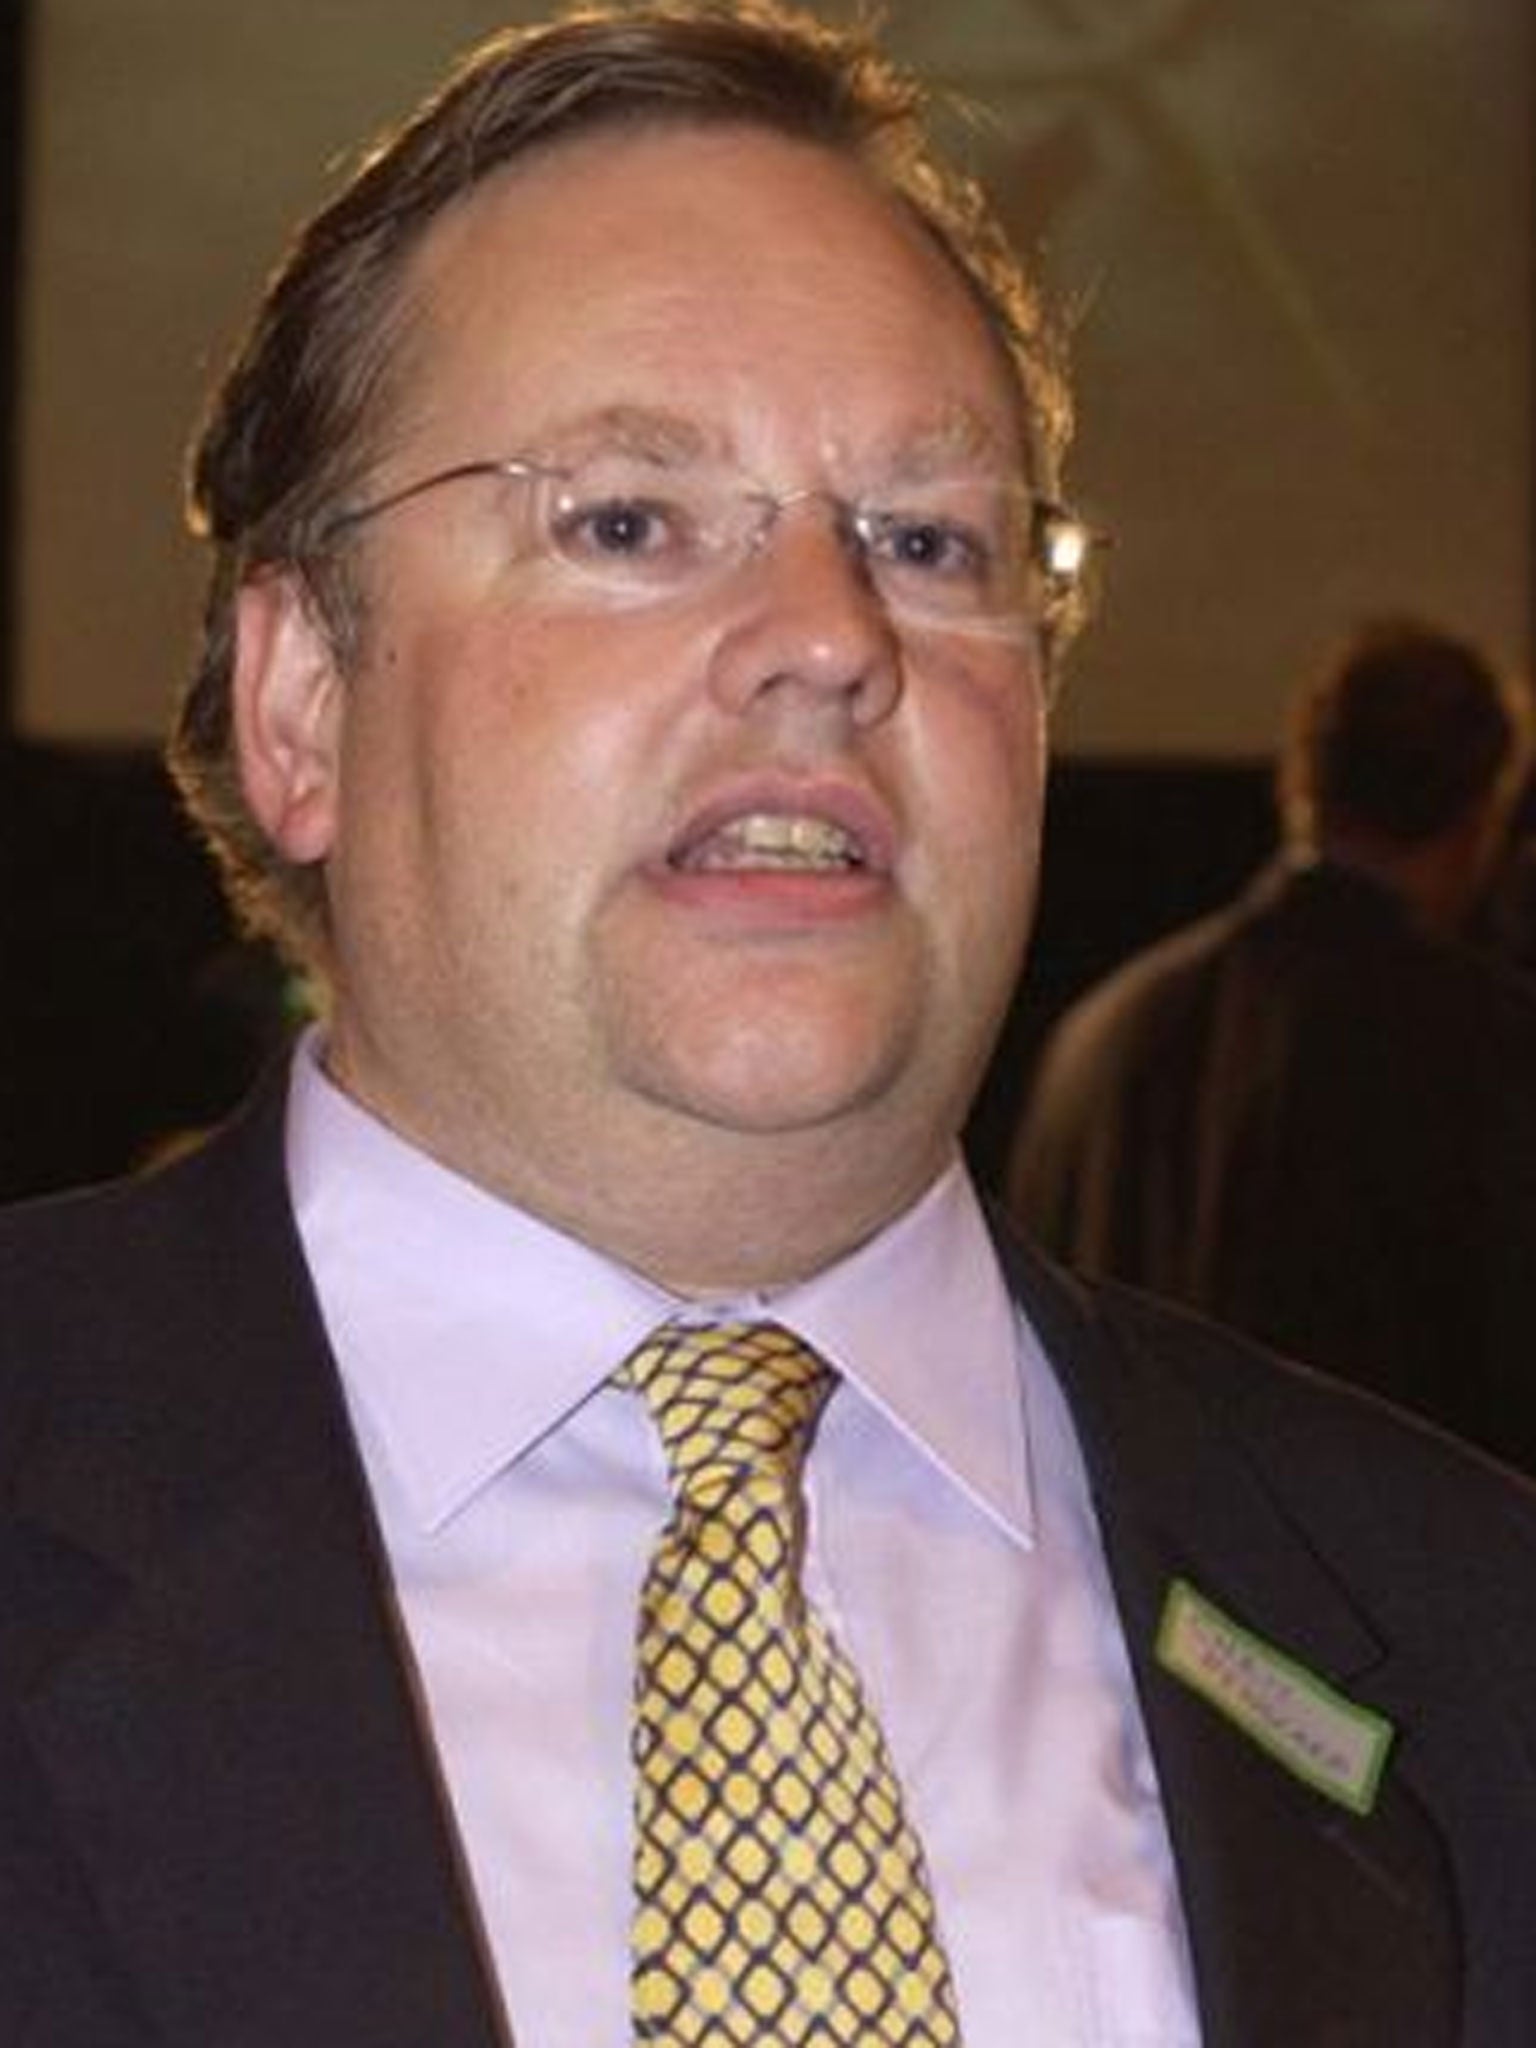 Lord Rennard: Party’s former chief executive has denied the claims from Lib Dem activists